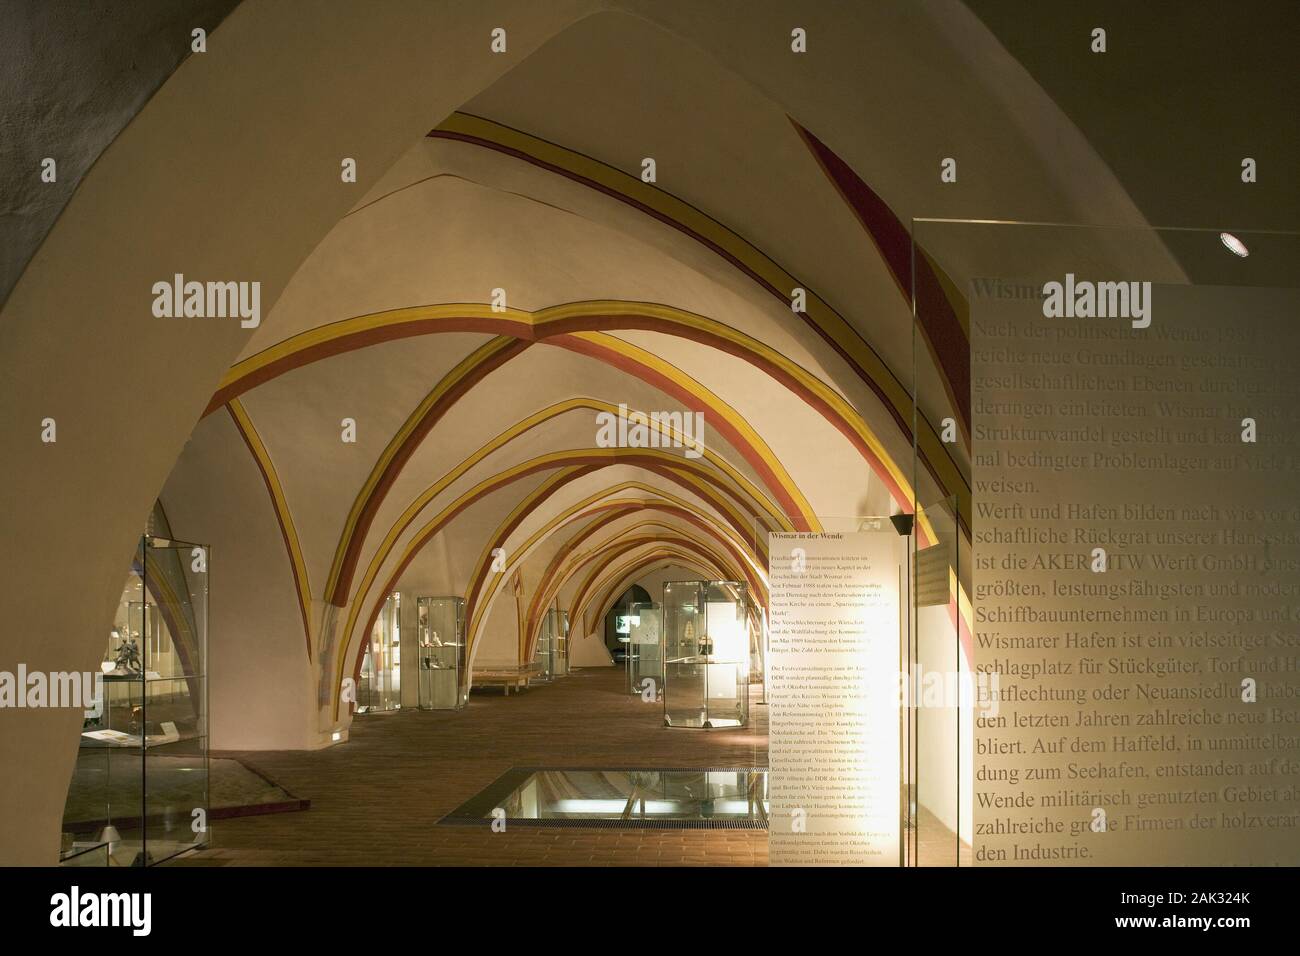 In the cellar with arches of the city hall in Wismar you can visit an exhibition with pictures about the history of the city Wismar, Mecklenburg-Weste Stock Photo